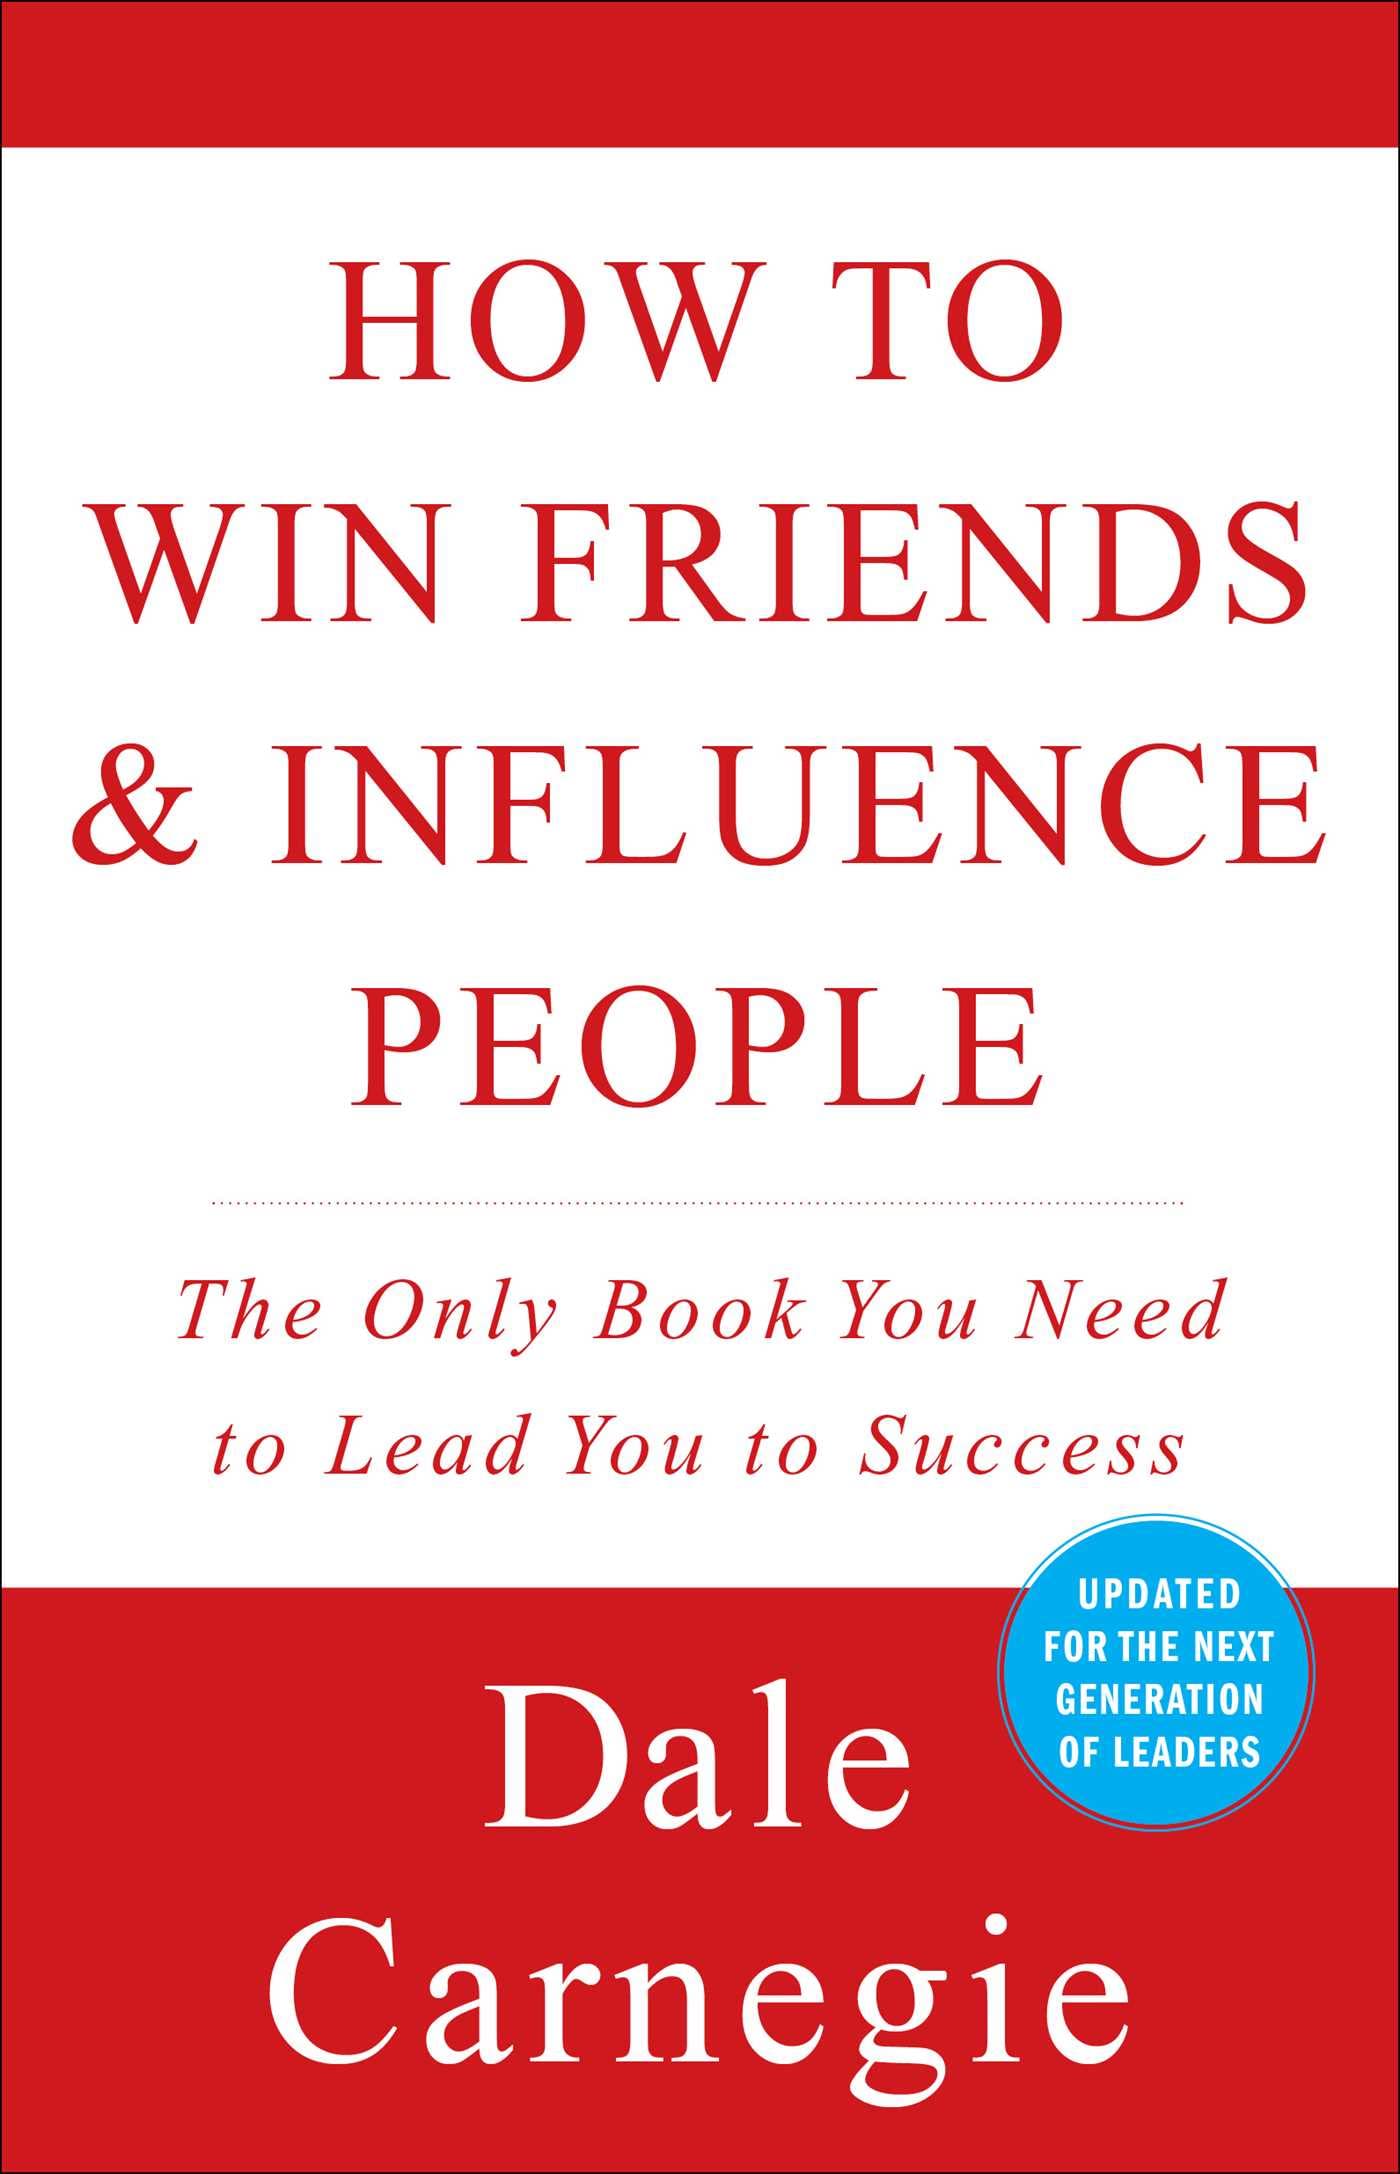 How To Win Friends And Influence People PDF